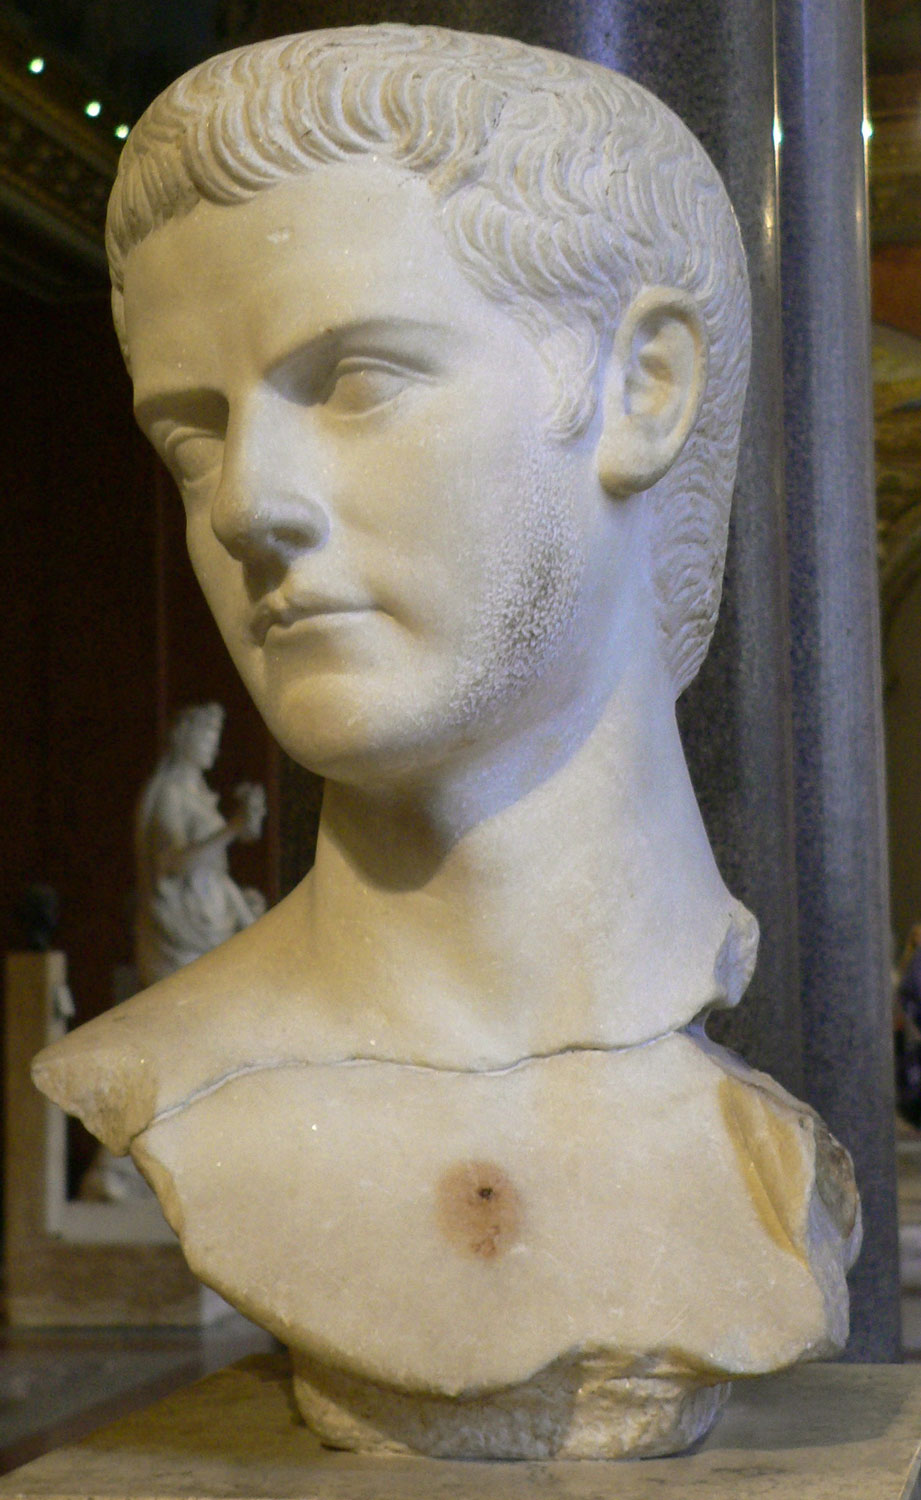 From Caligula to Constantine by Eric R. Varner